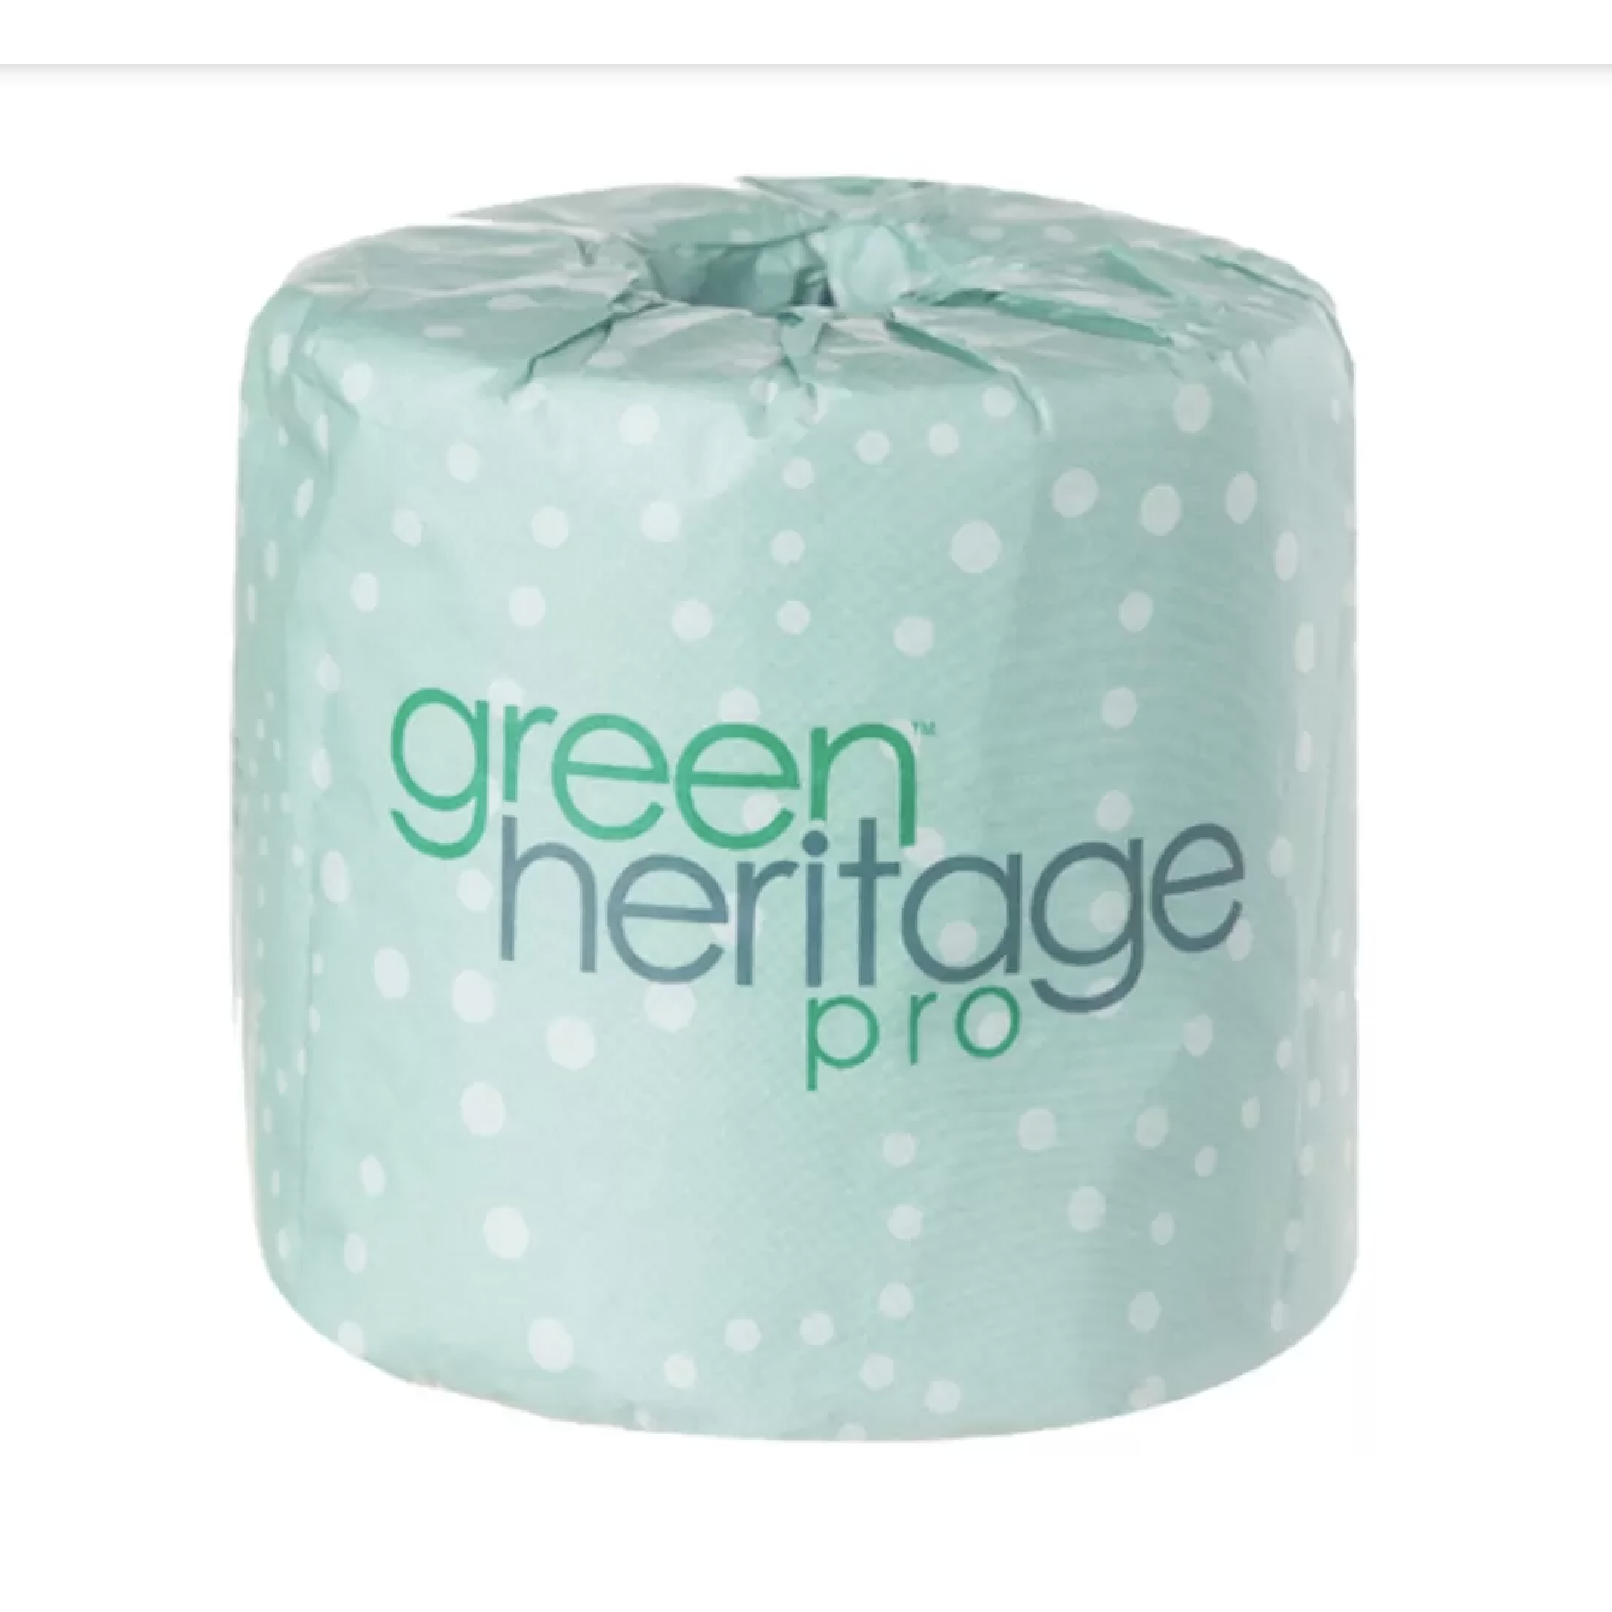 Green Heritage¨ Pro 2-Ply Toilet Paper - Available in 400 and 500 Sheet Rolls